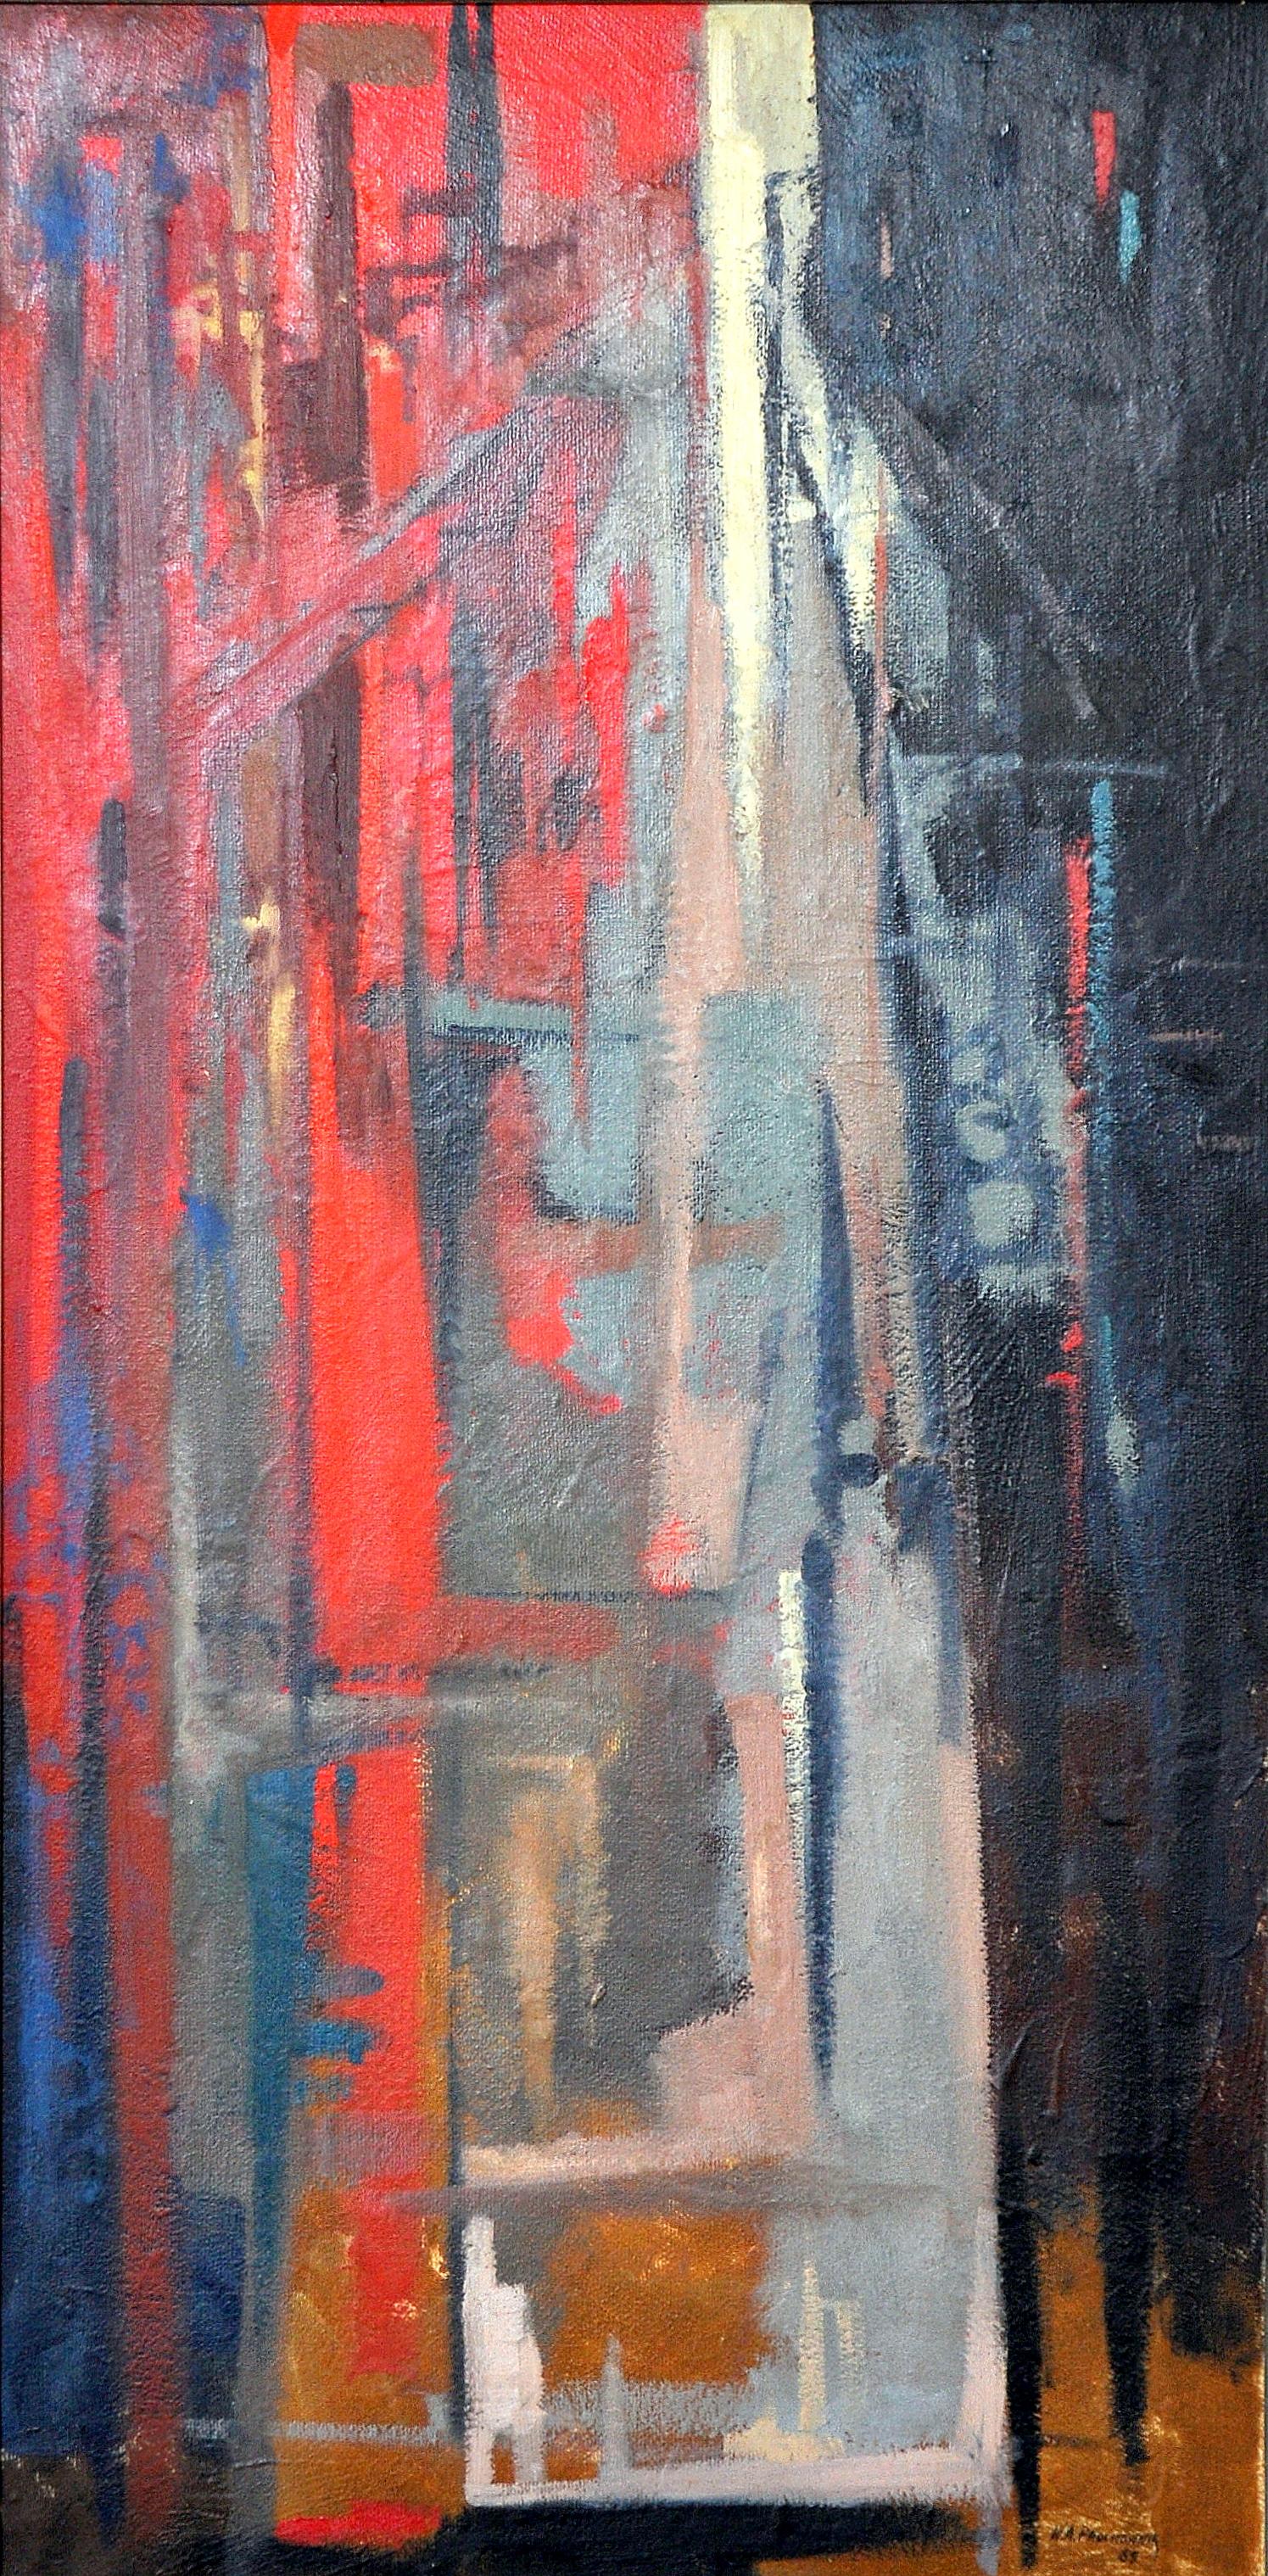 Original abstract oil painting by Walter A. Prochownik (1923-2000) with vibrant red, blue, amber and grey tones. Signed and dated. Artist framed, unframed size: 48 inches x 24 inches.

Walter A. Prochownik was an internationally recognized painter